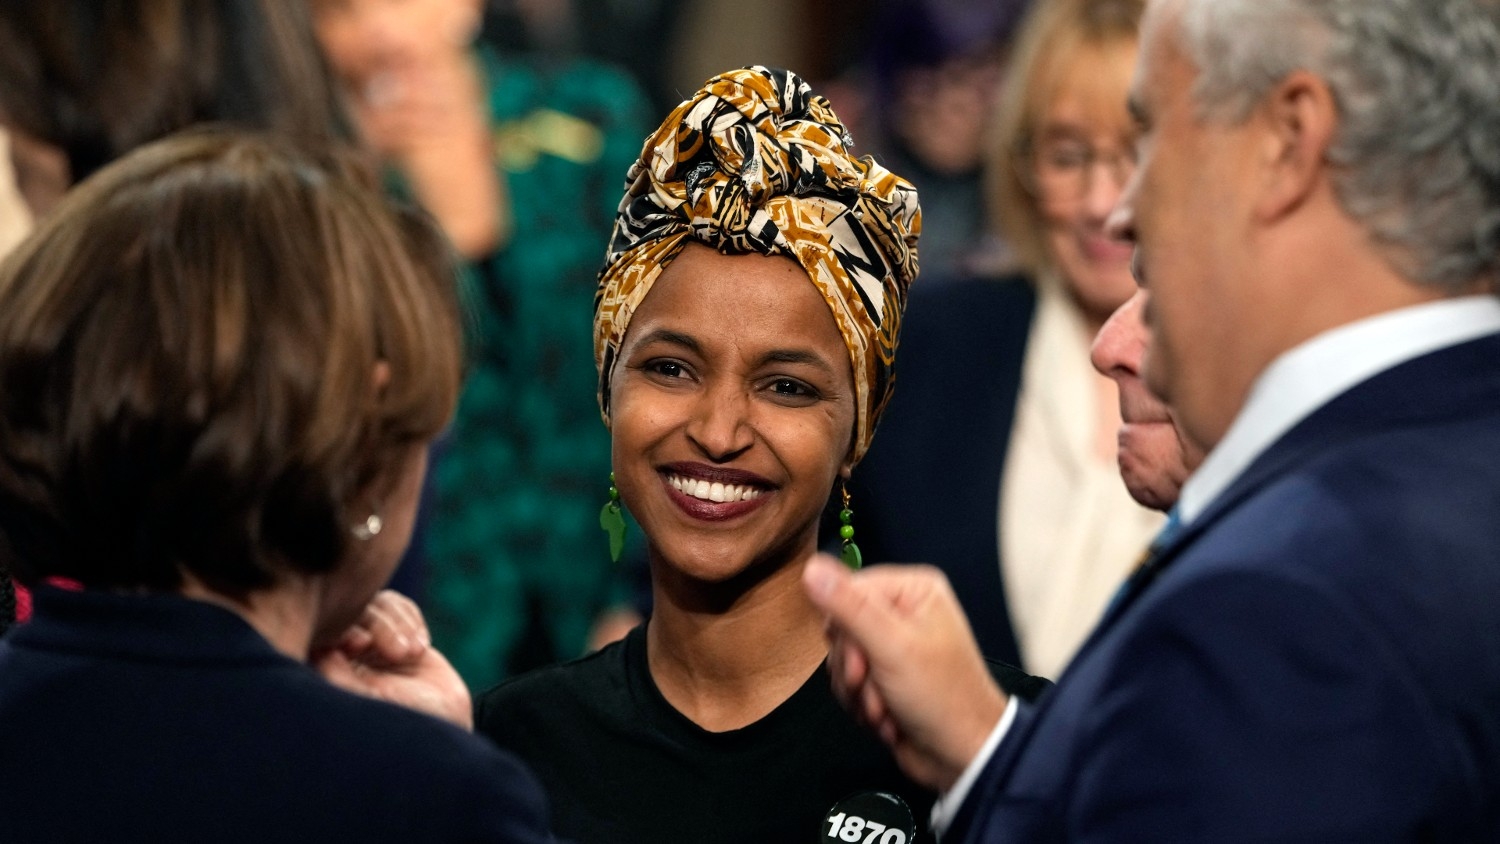 Representative Ilhan Omar arrives before President Joe Biden delivers the State of the Union address in the House Chamber of the US Capitol in Washington on 7 February 2023.